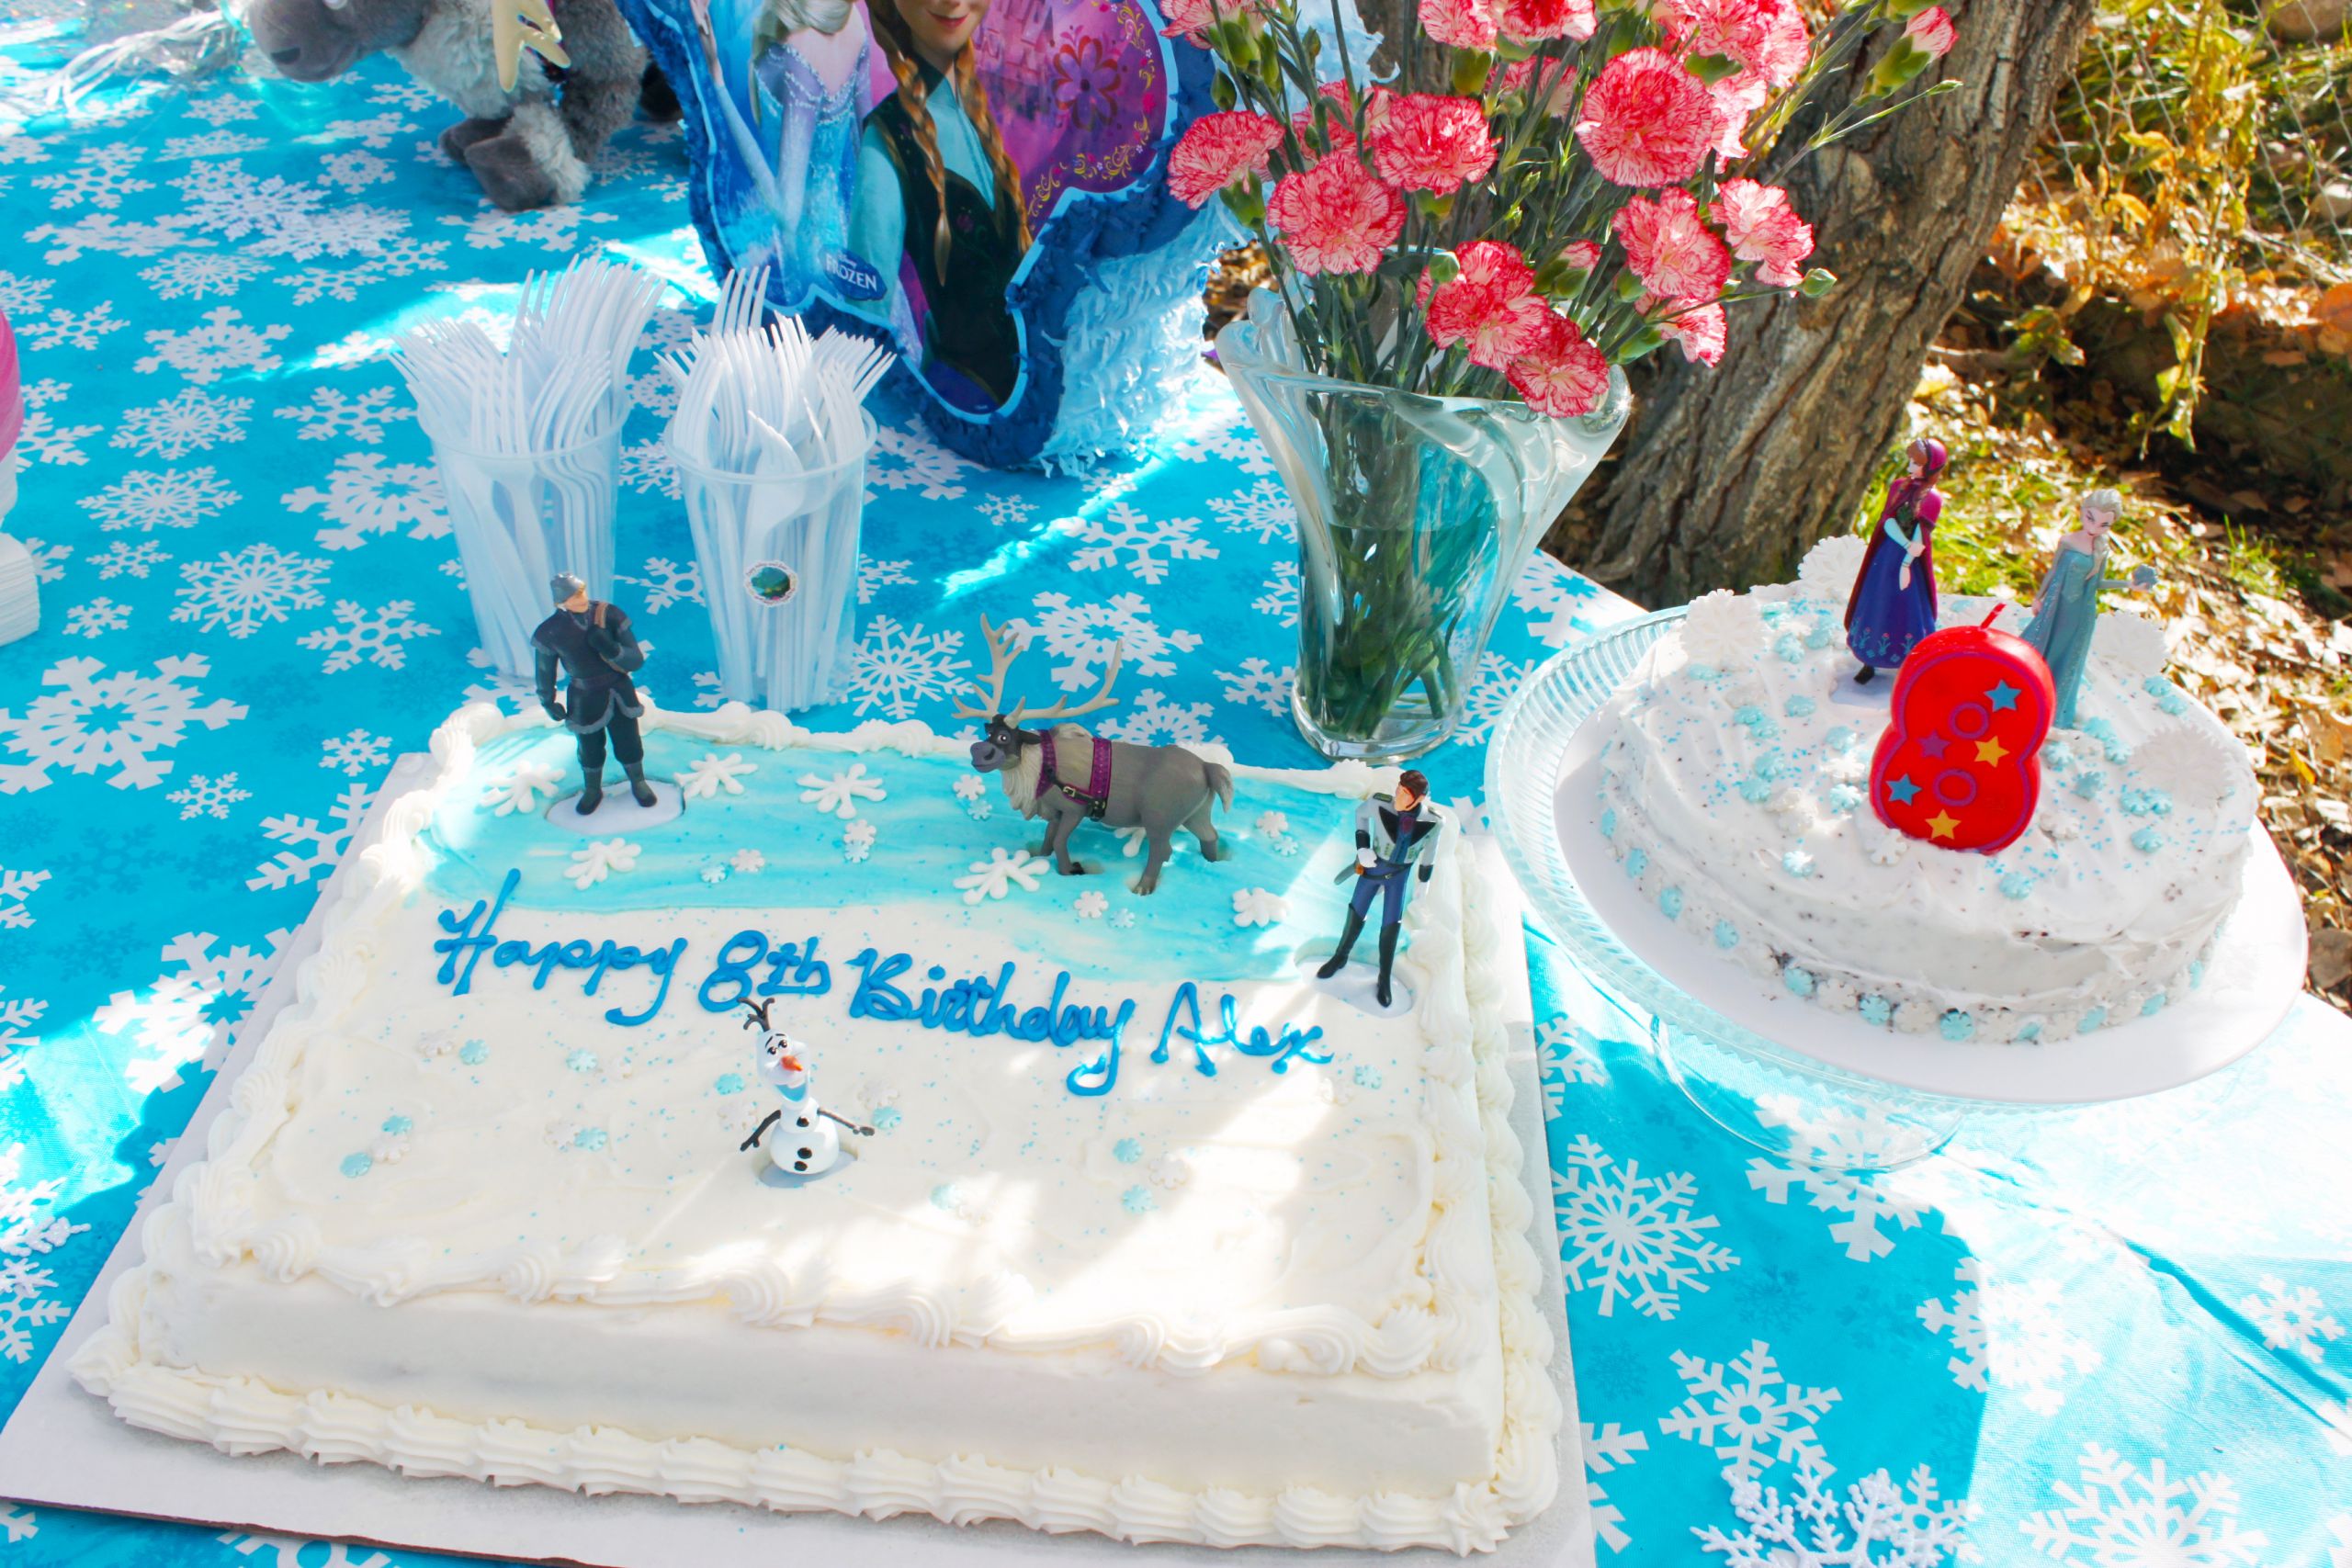 Frozen Themed Birthday Cake
 My Daughters outdoor “Frozen” Birthday Party in November